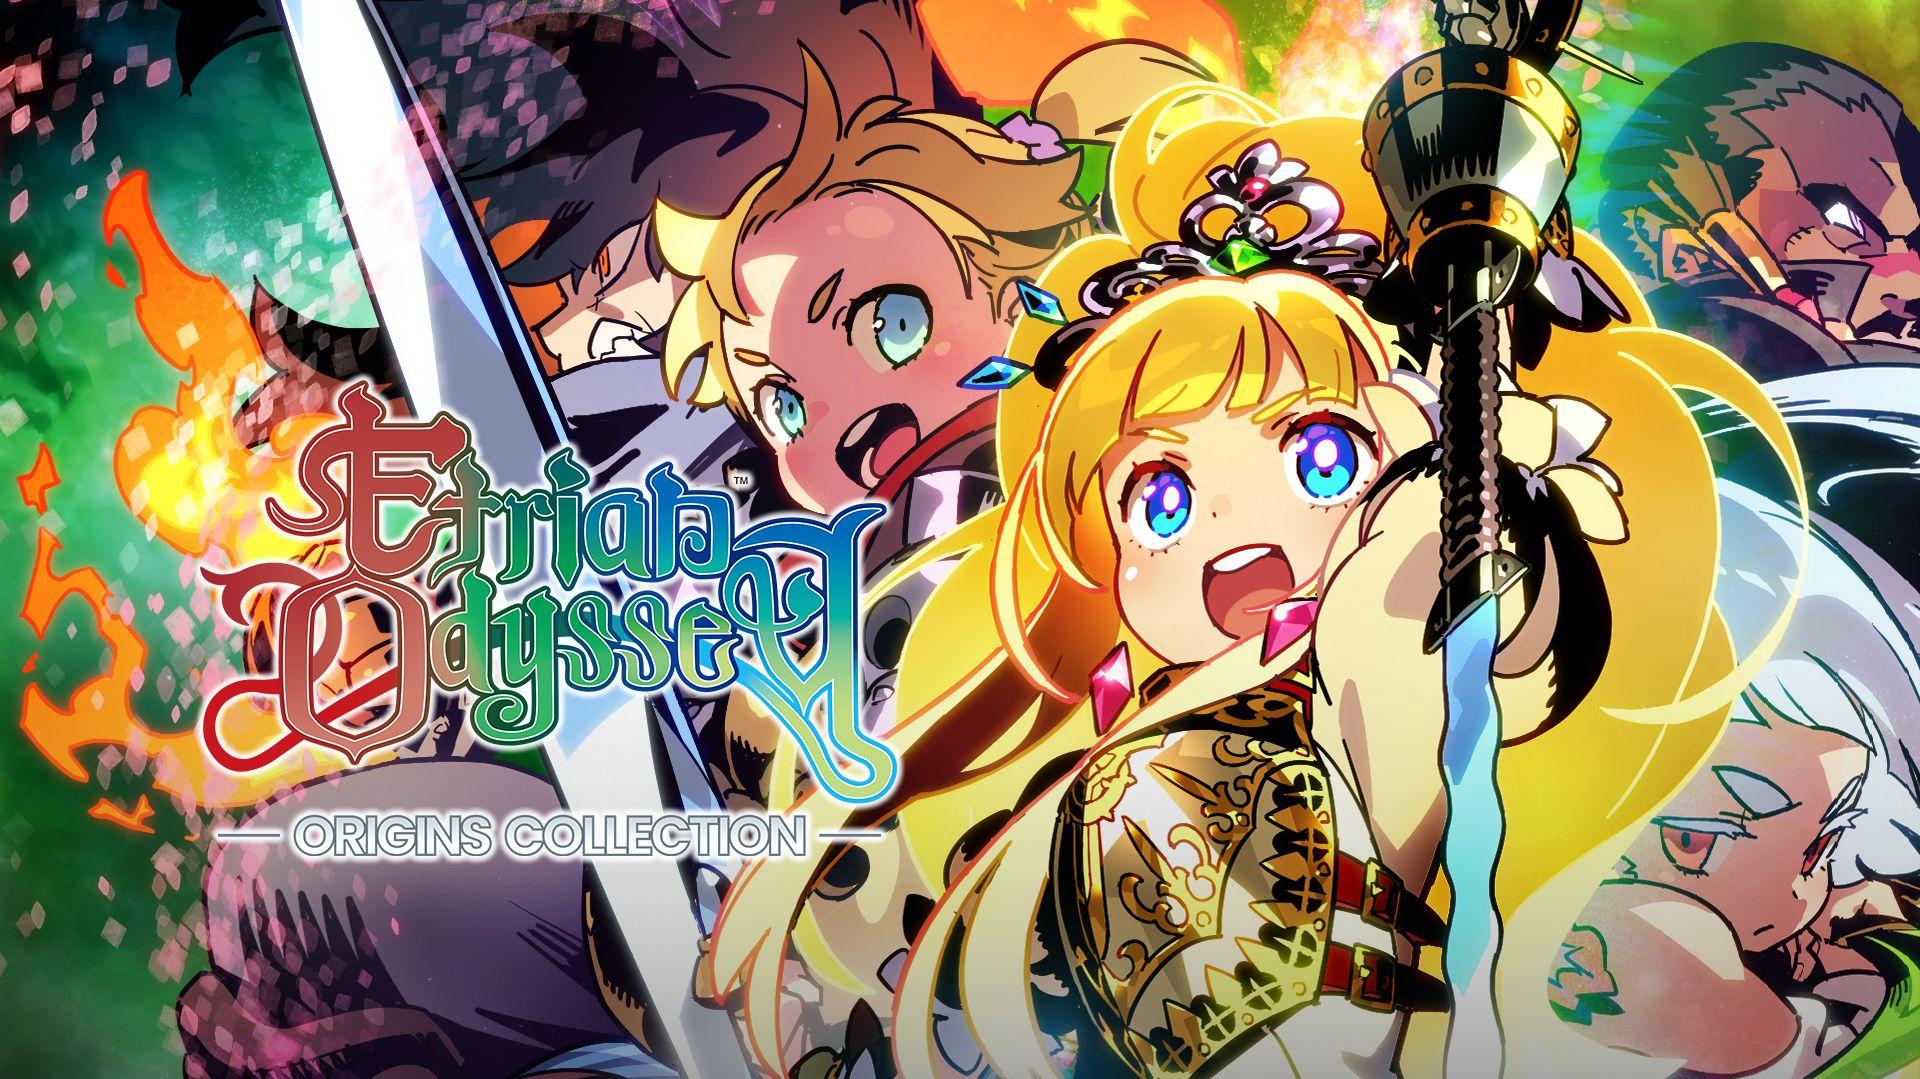 Etrian Odyssey team says more time needed for next game